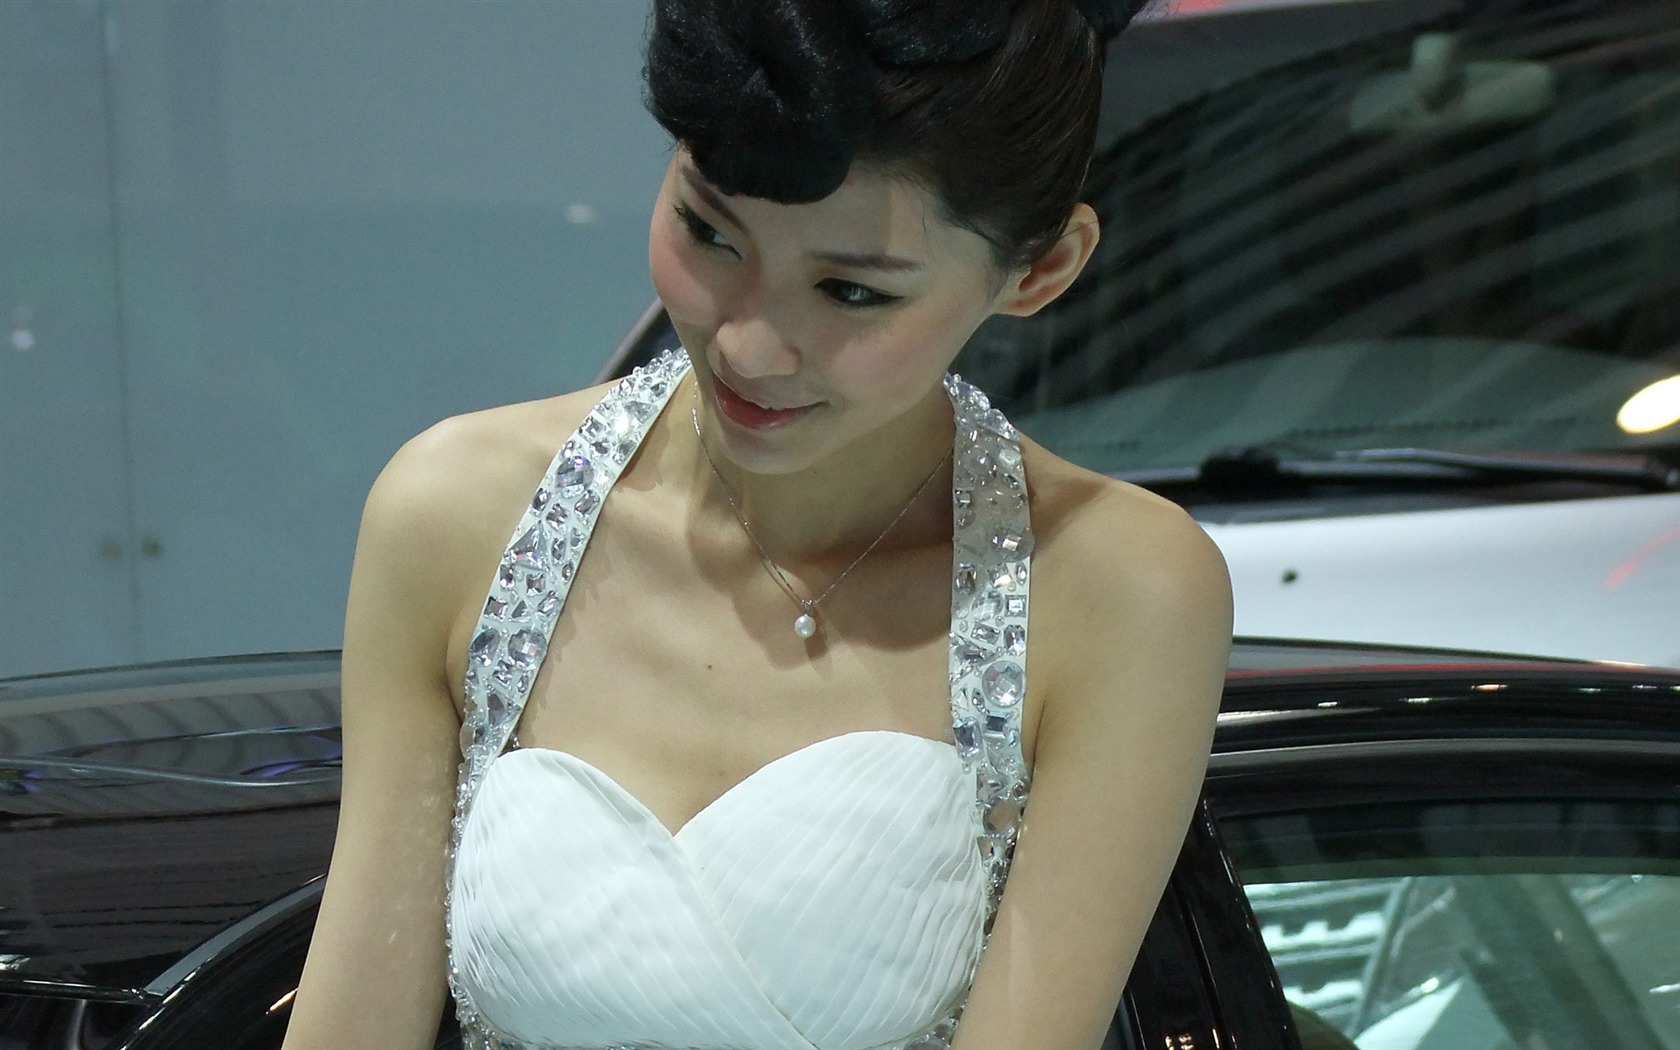 2010 Beijing Auto Show car models Collection (2) #1 - 1680x1050